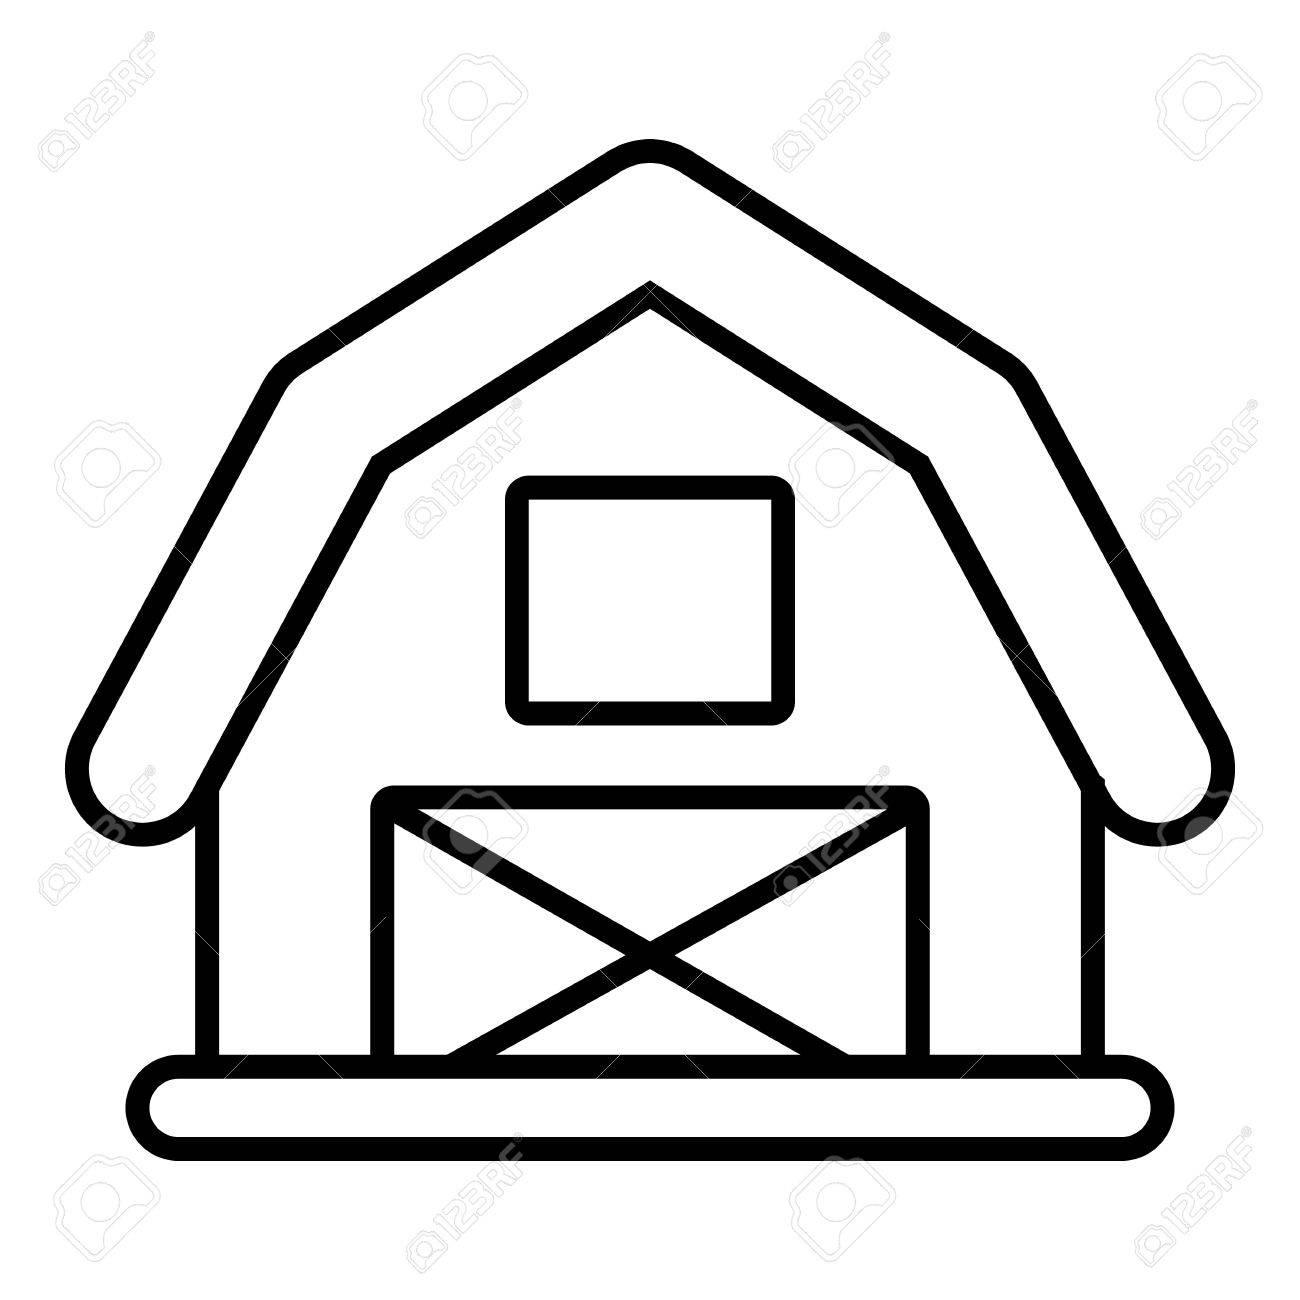 Barn Icon On Black And White Vector Backgrounds Vector Art | Getty 